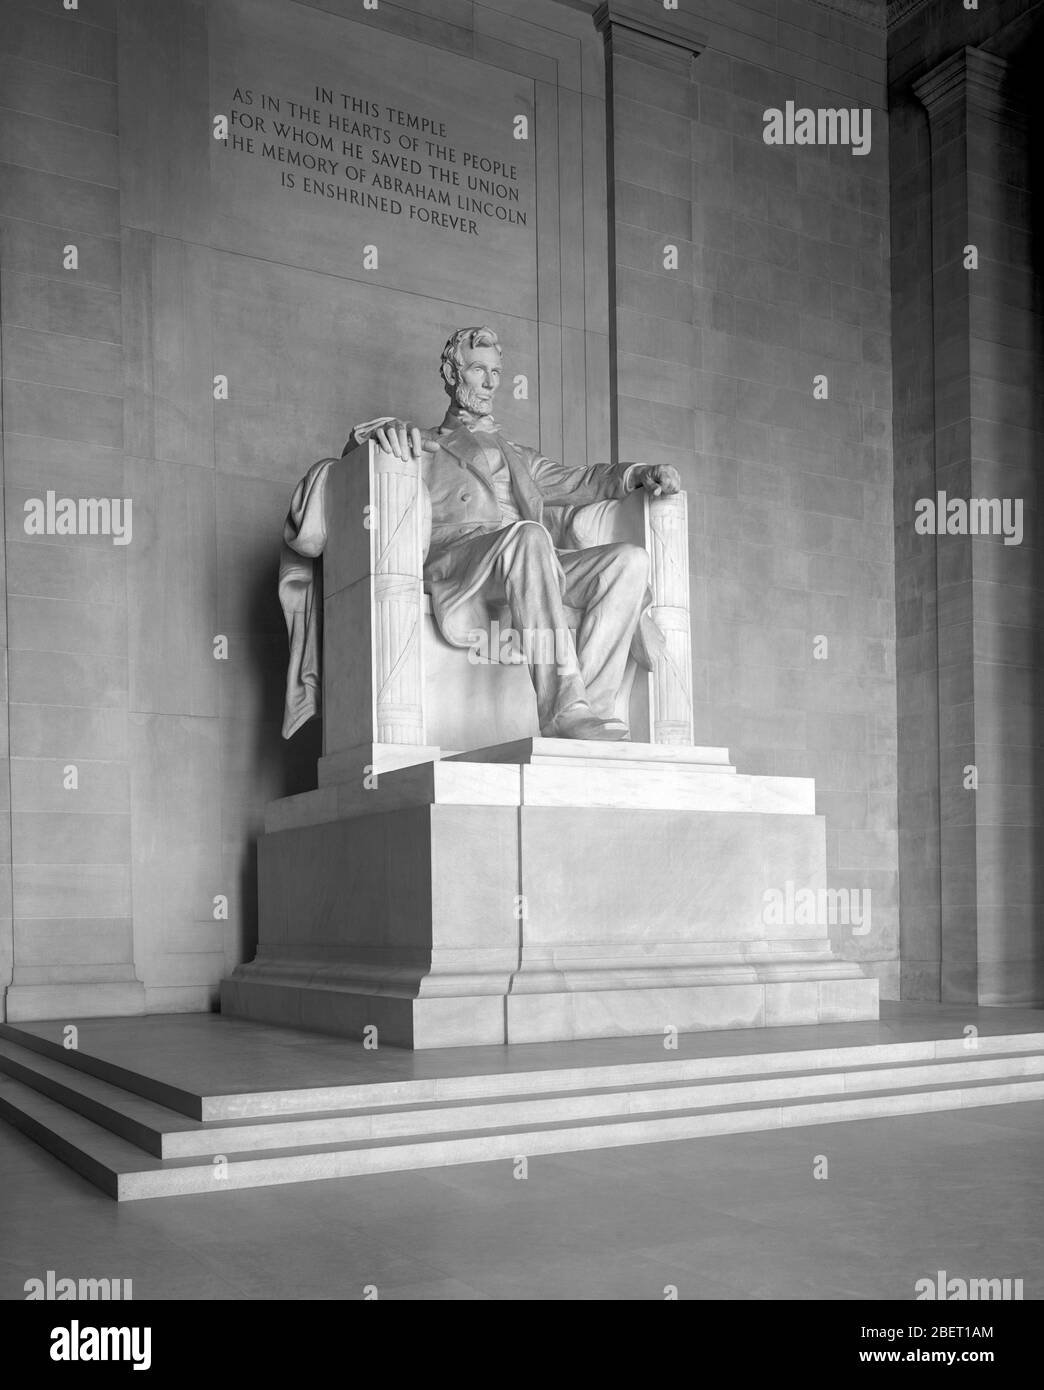 The President Abraham Lincoln statue inside the Lincoln Memorial. Stock Photo